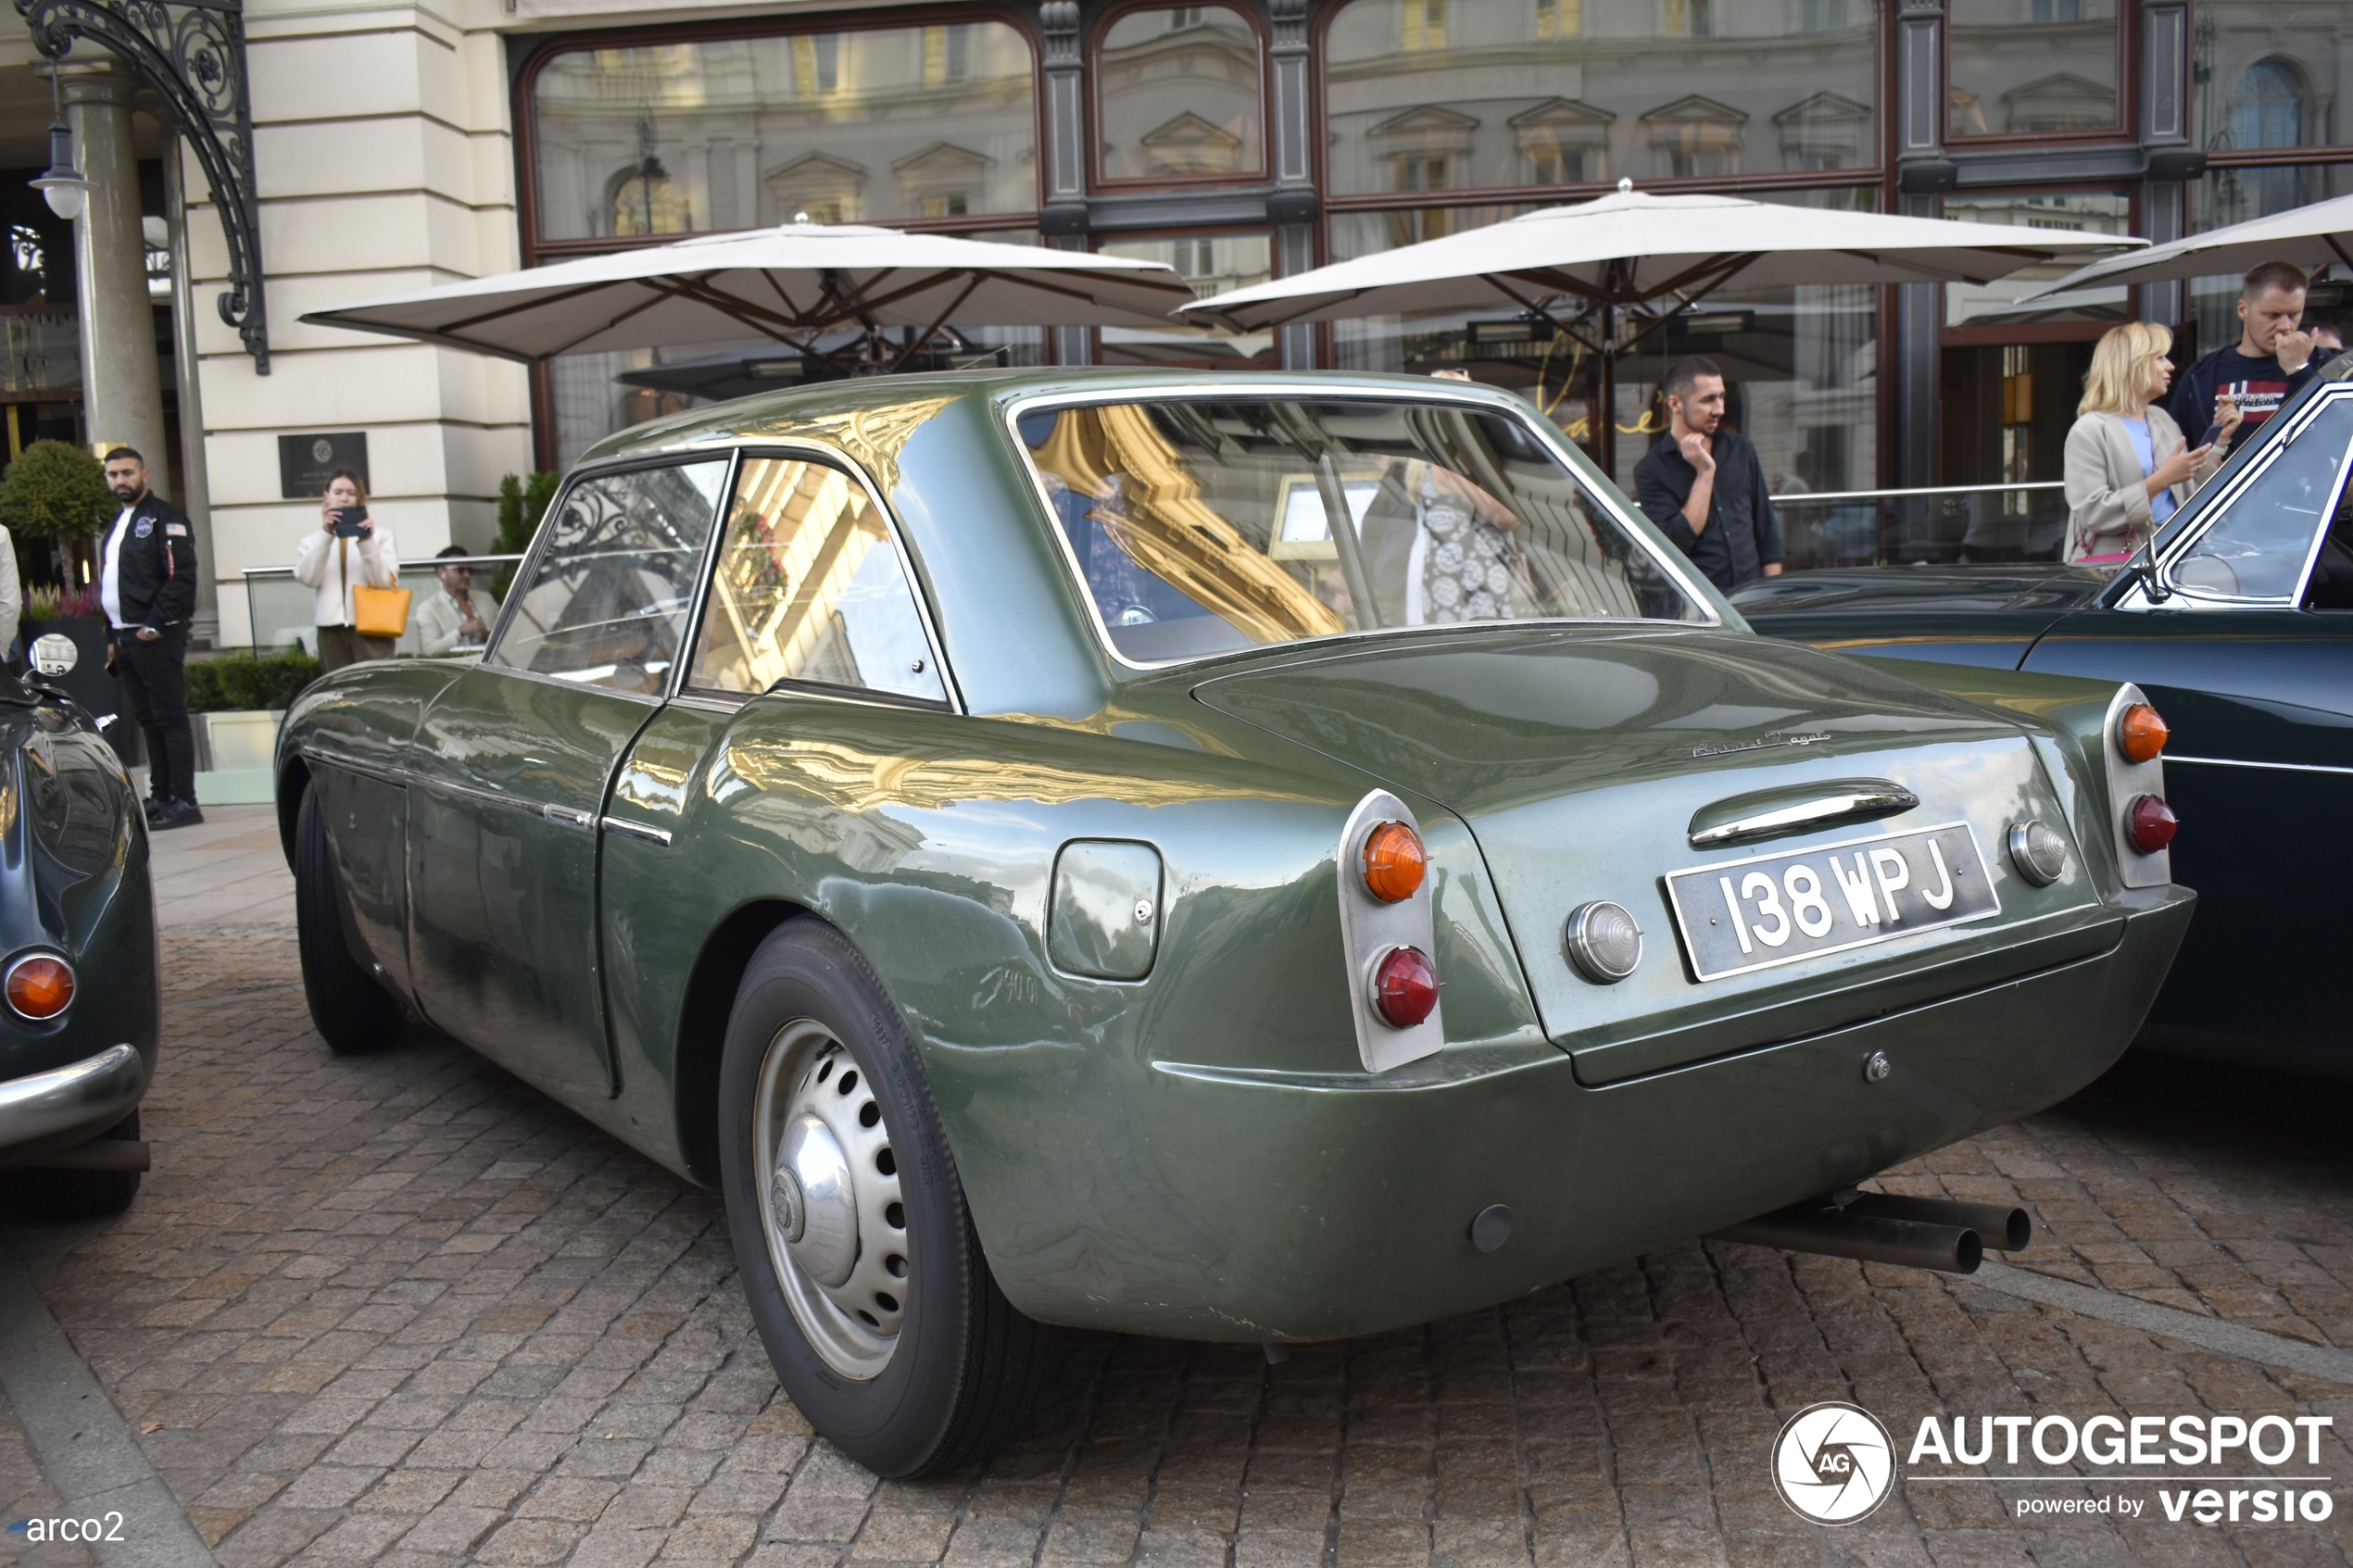 For the first time we see a Bristol 406 Zagato